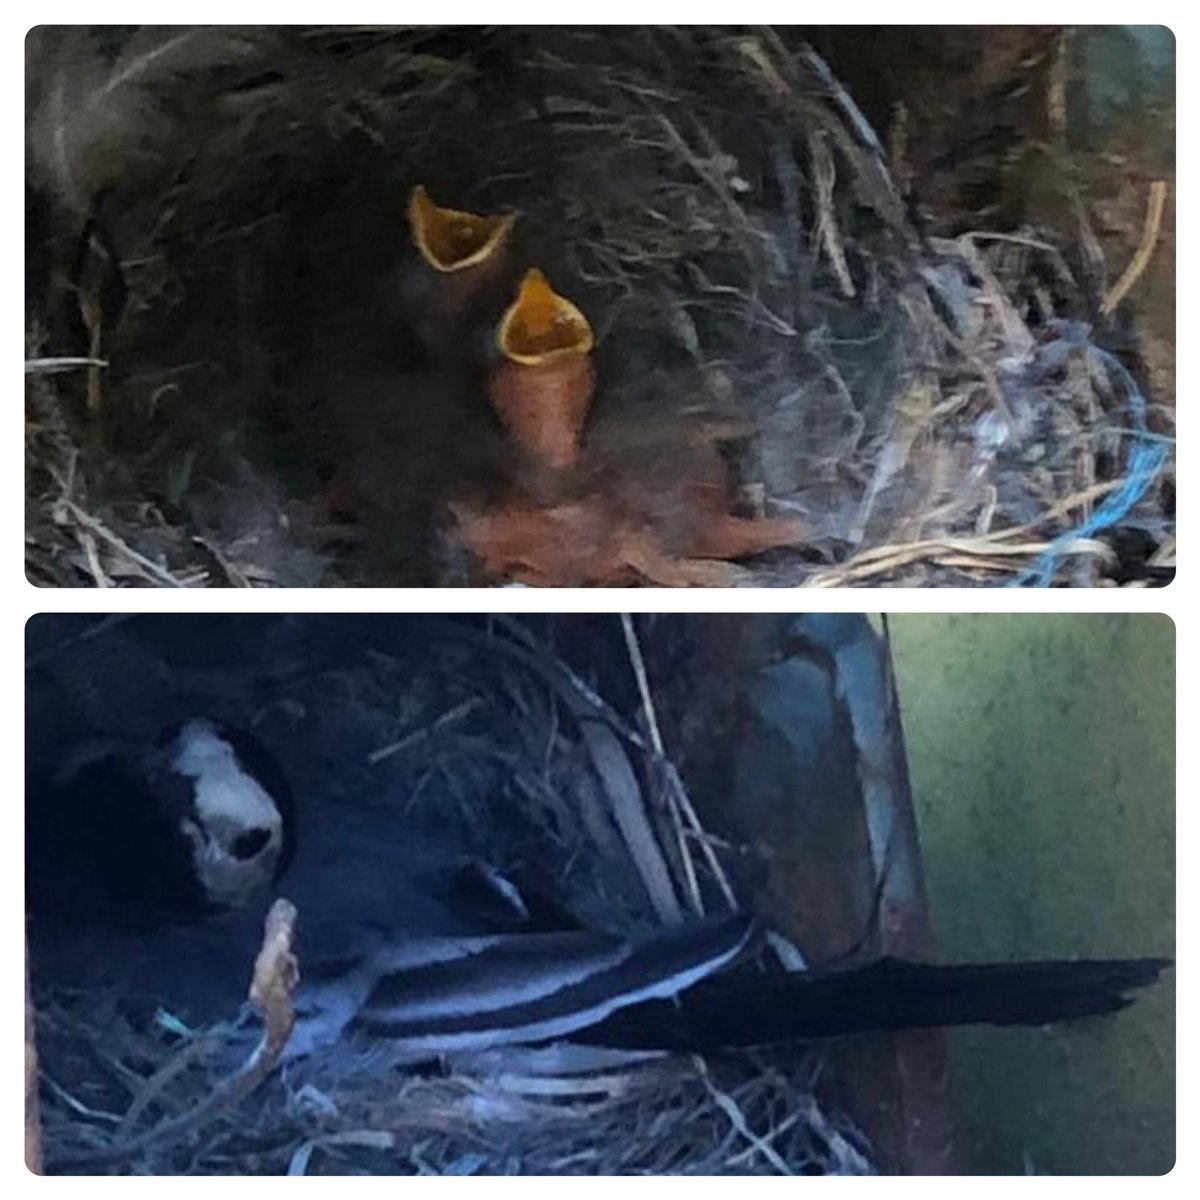 It not just our washplants that requires feeding, these chaps are keeping mum and dad busy too! #QuarryLife 
#BabyBirds
#NaturePhotography 
#Wildlife